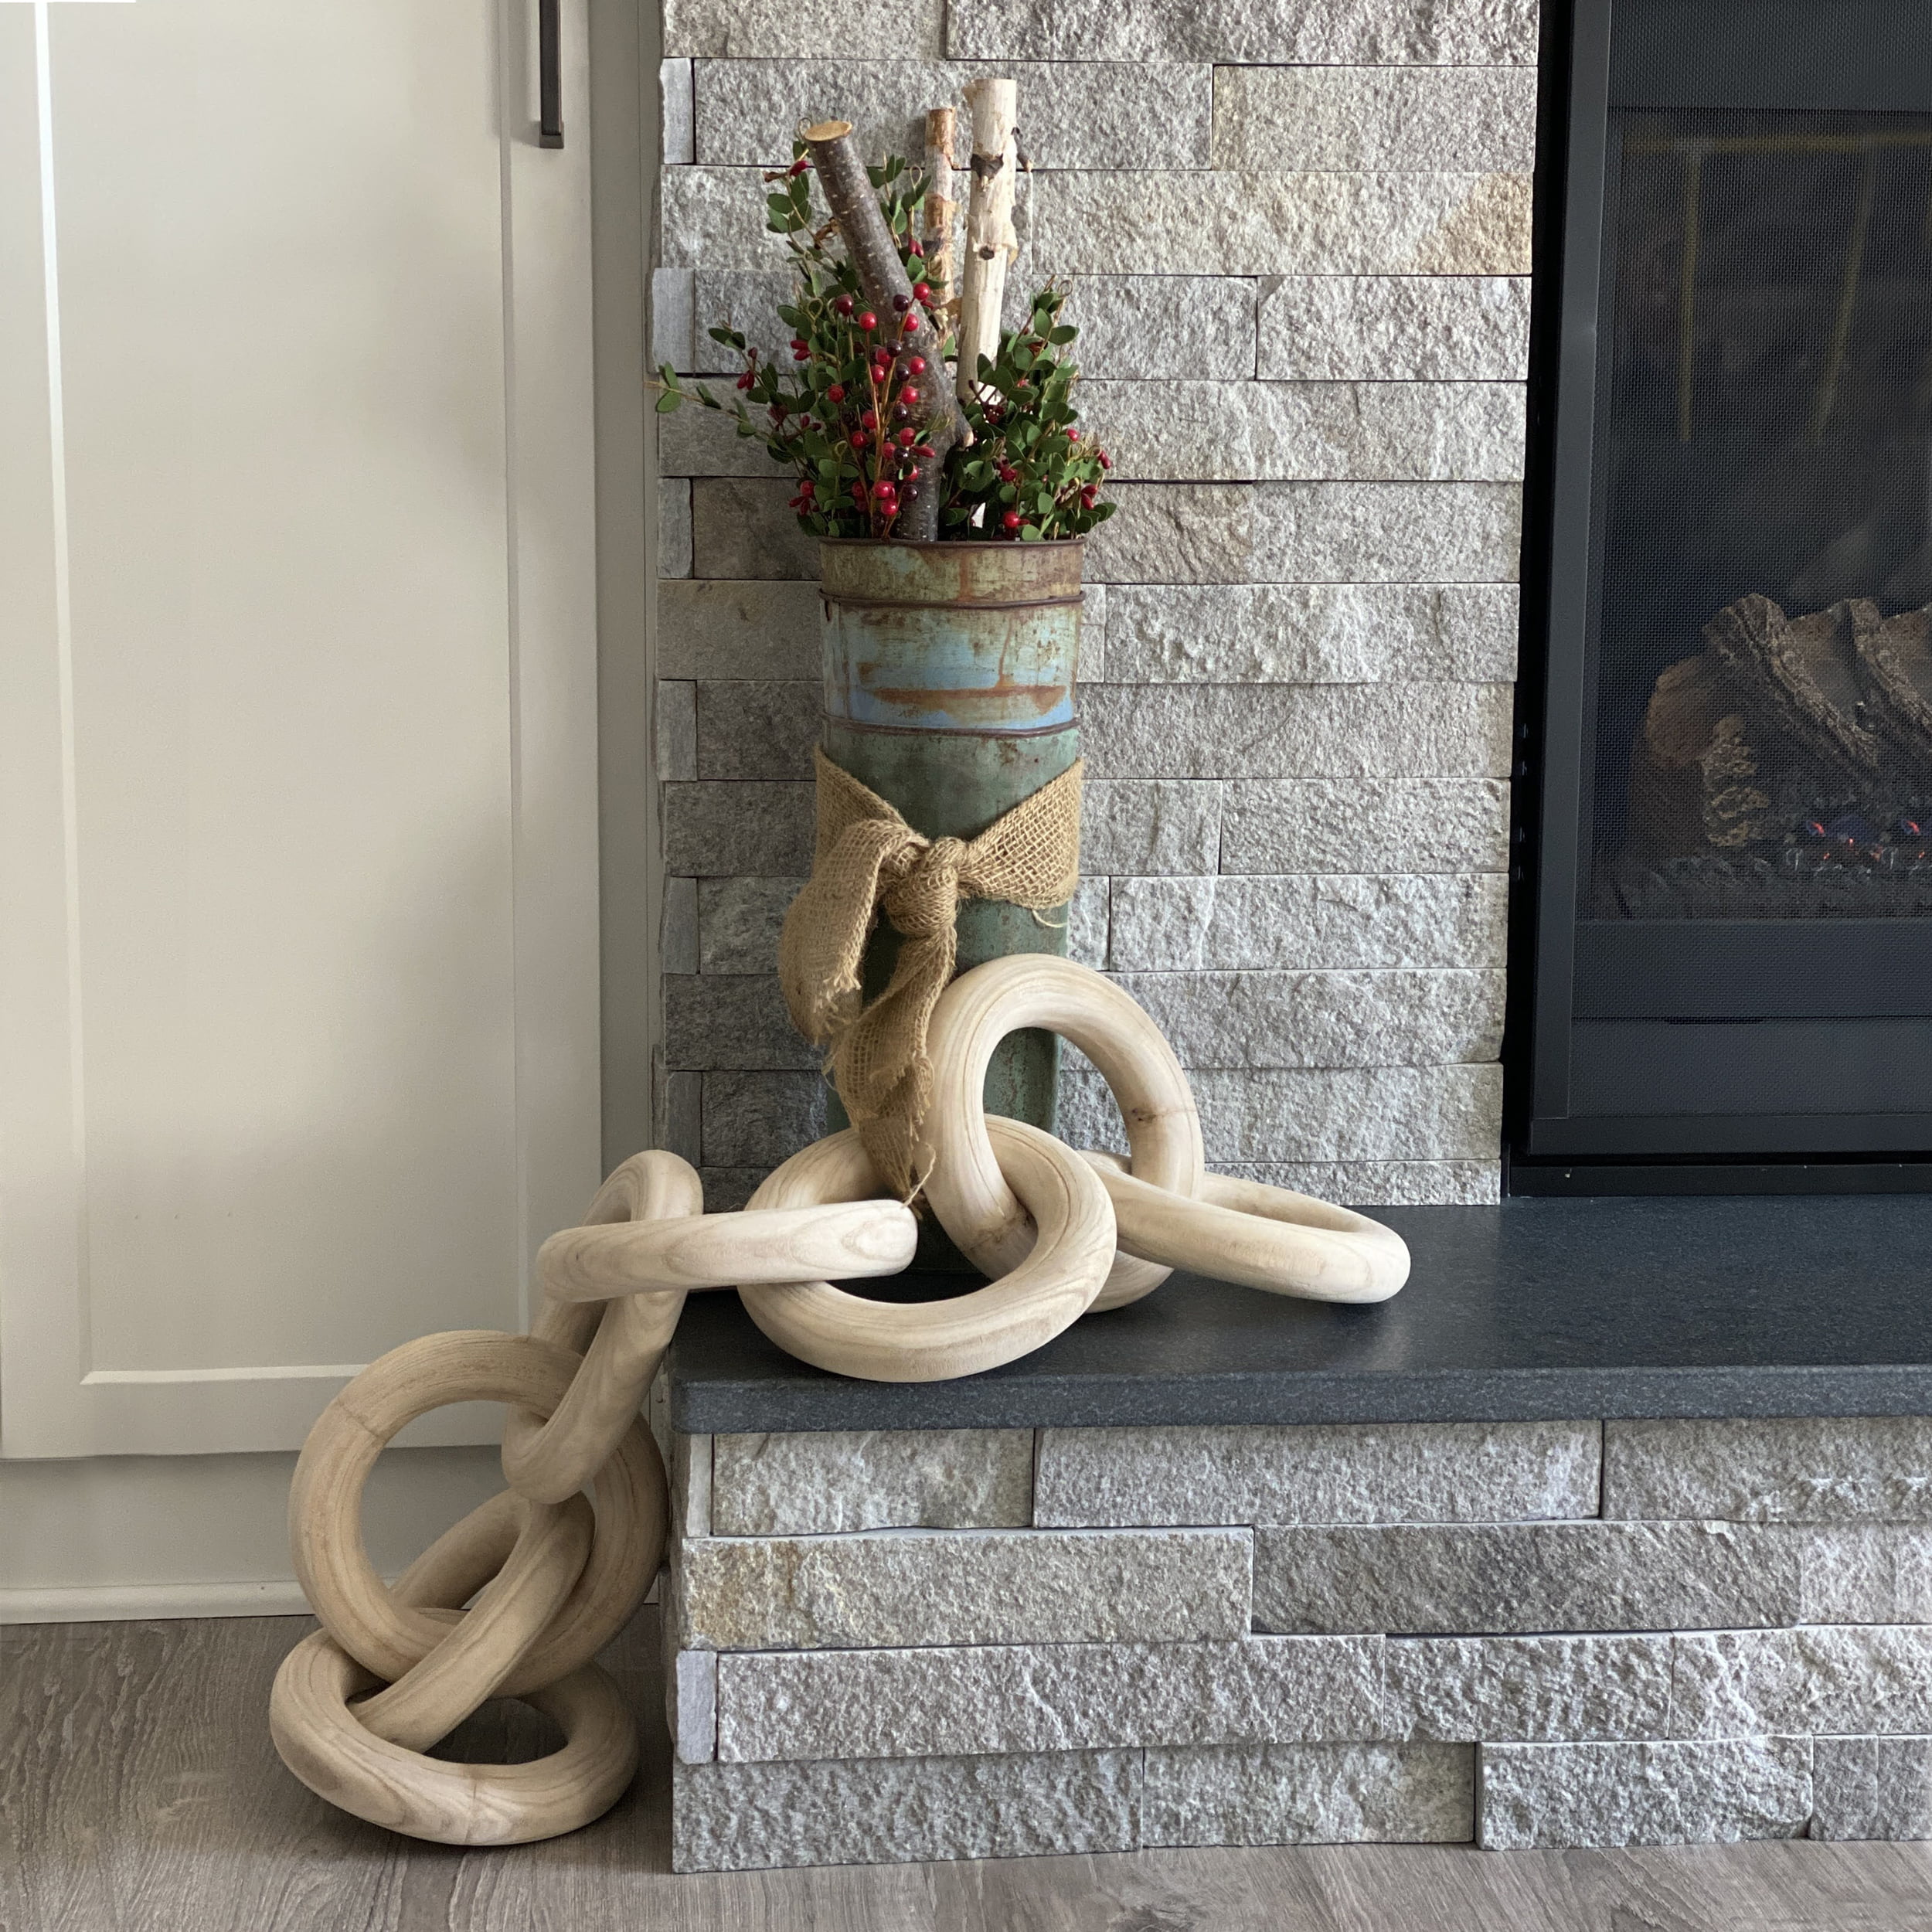 Pale Wood Chain (Large Link), Natural Decor